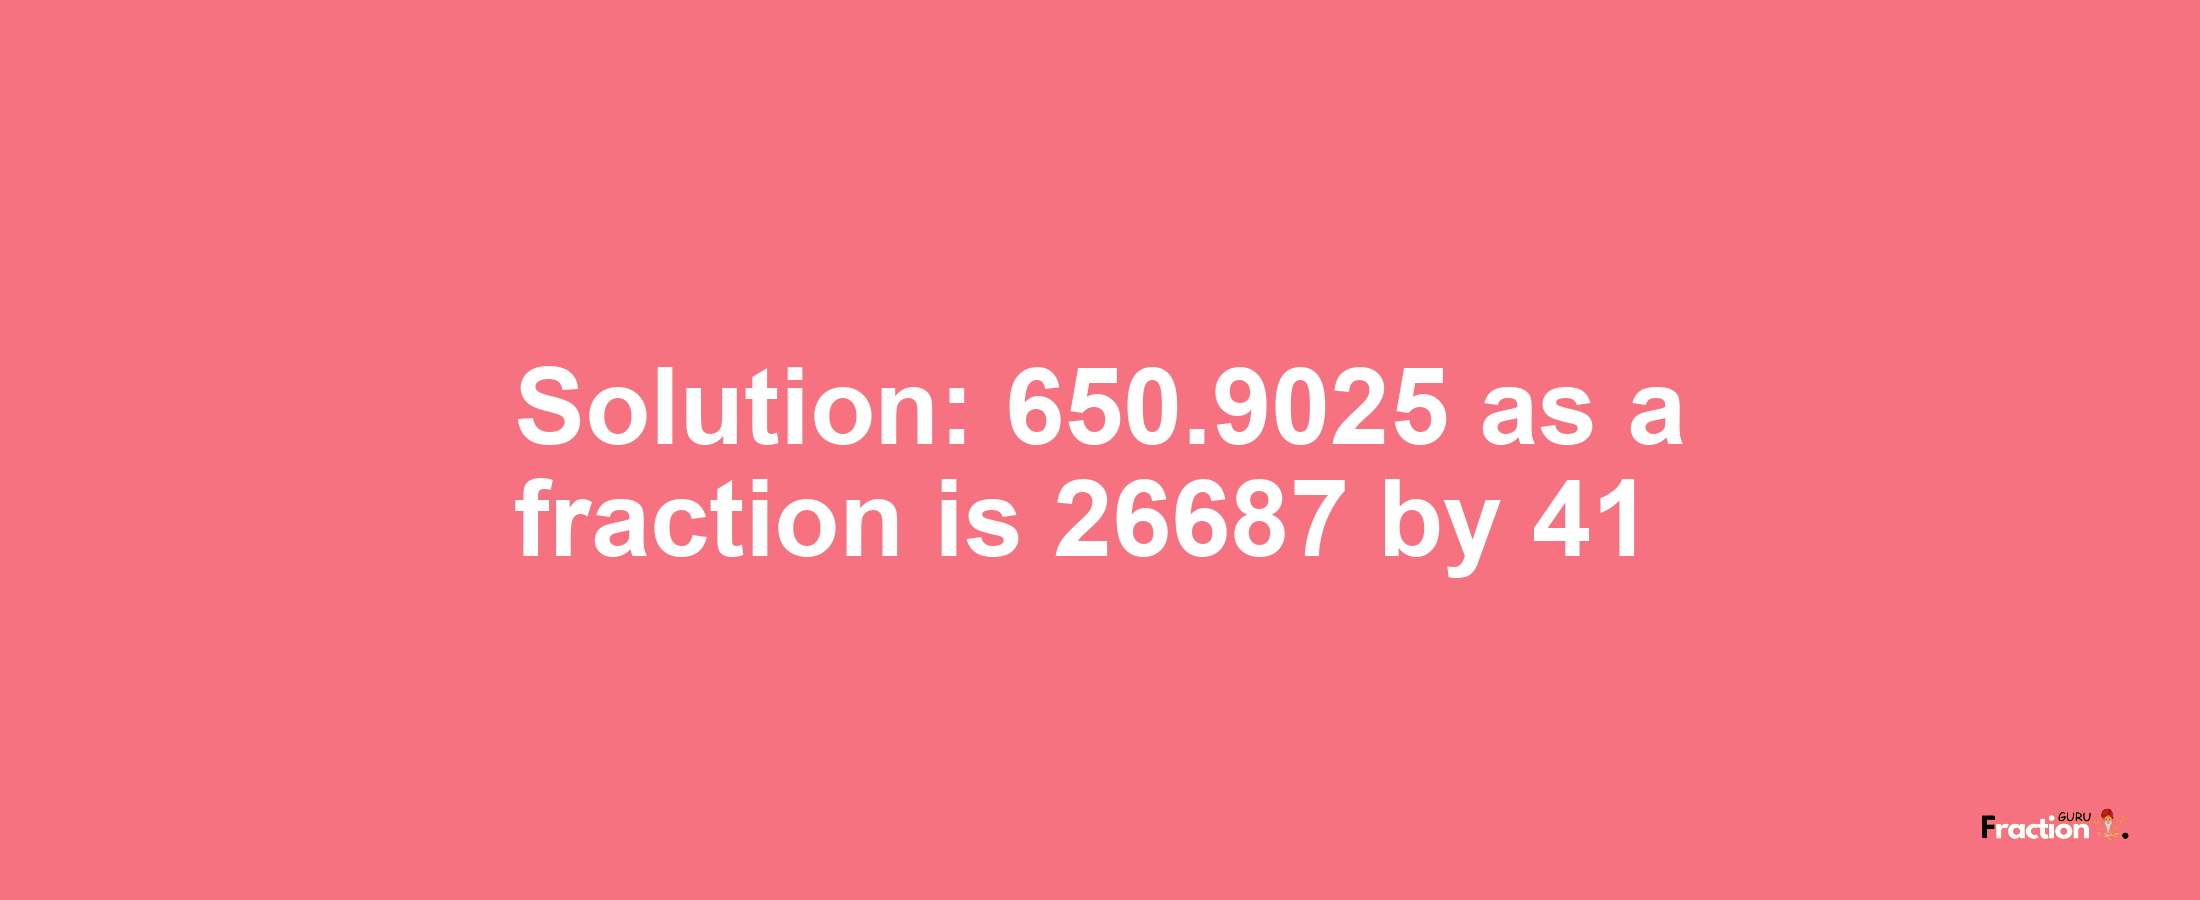 Solution:650.9025 as a fraction is 26687/41